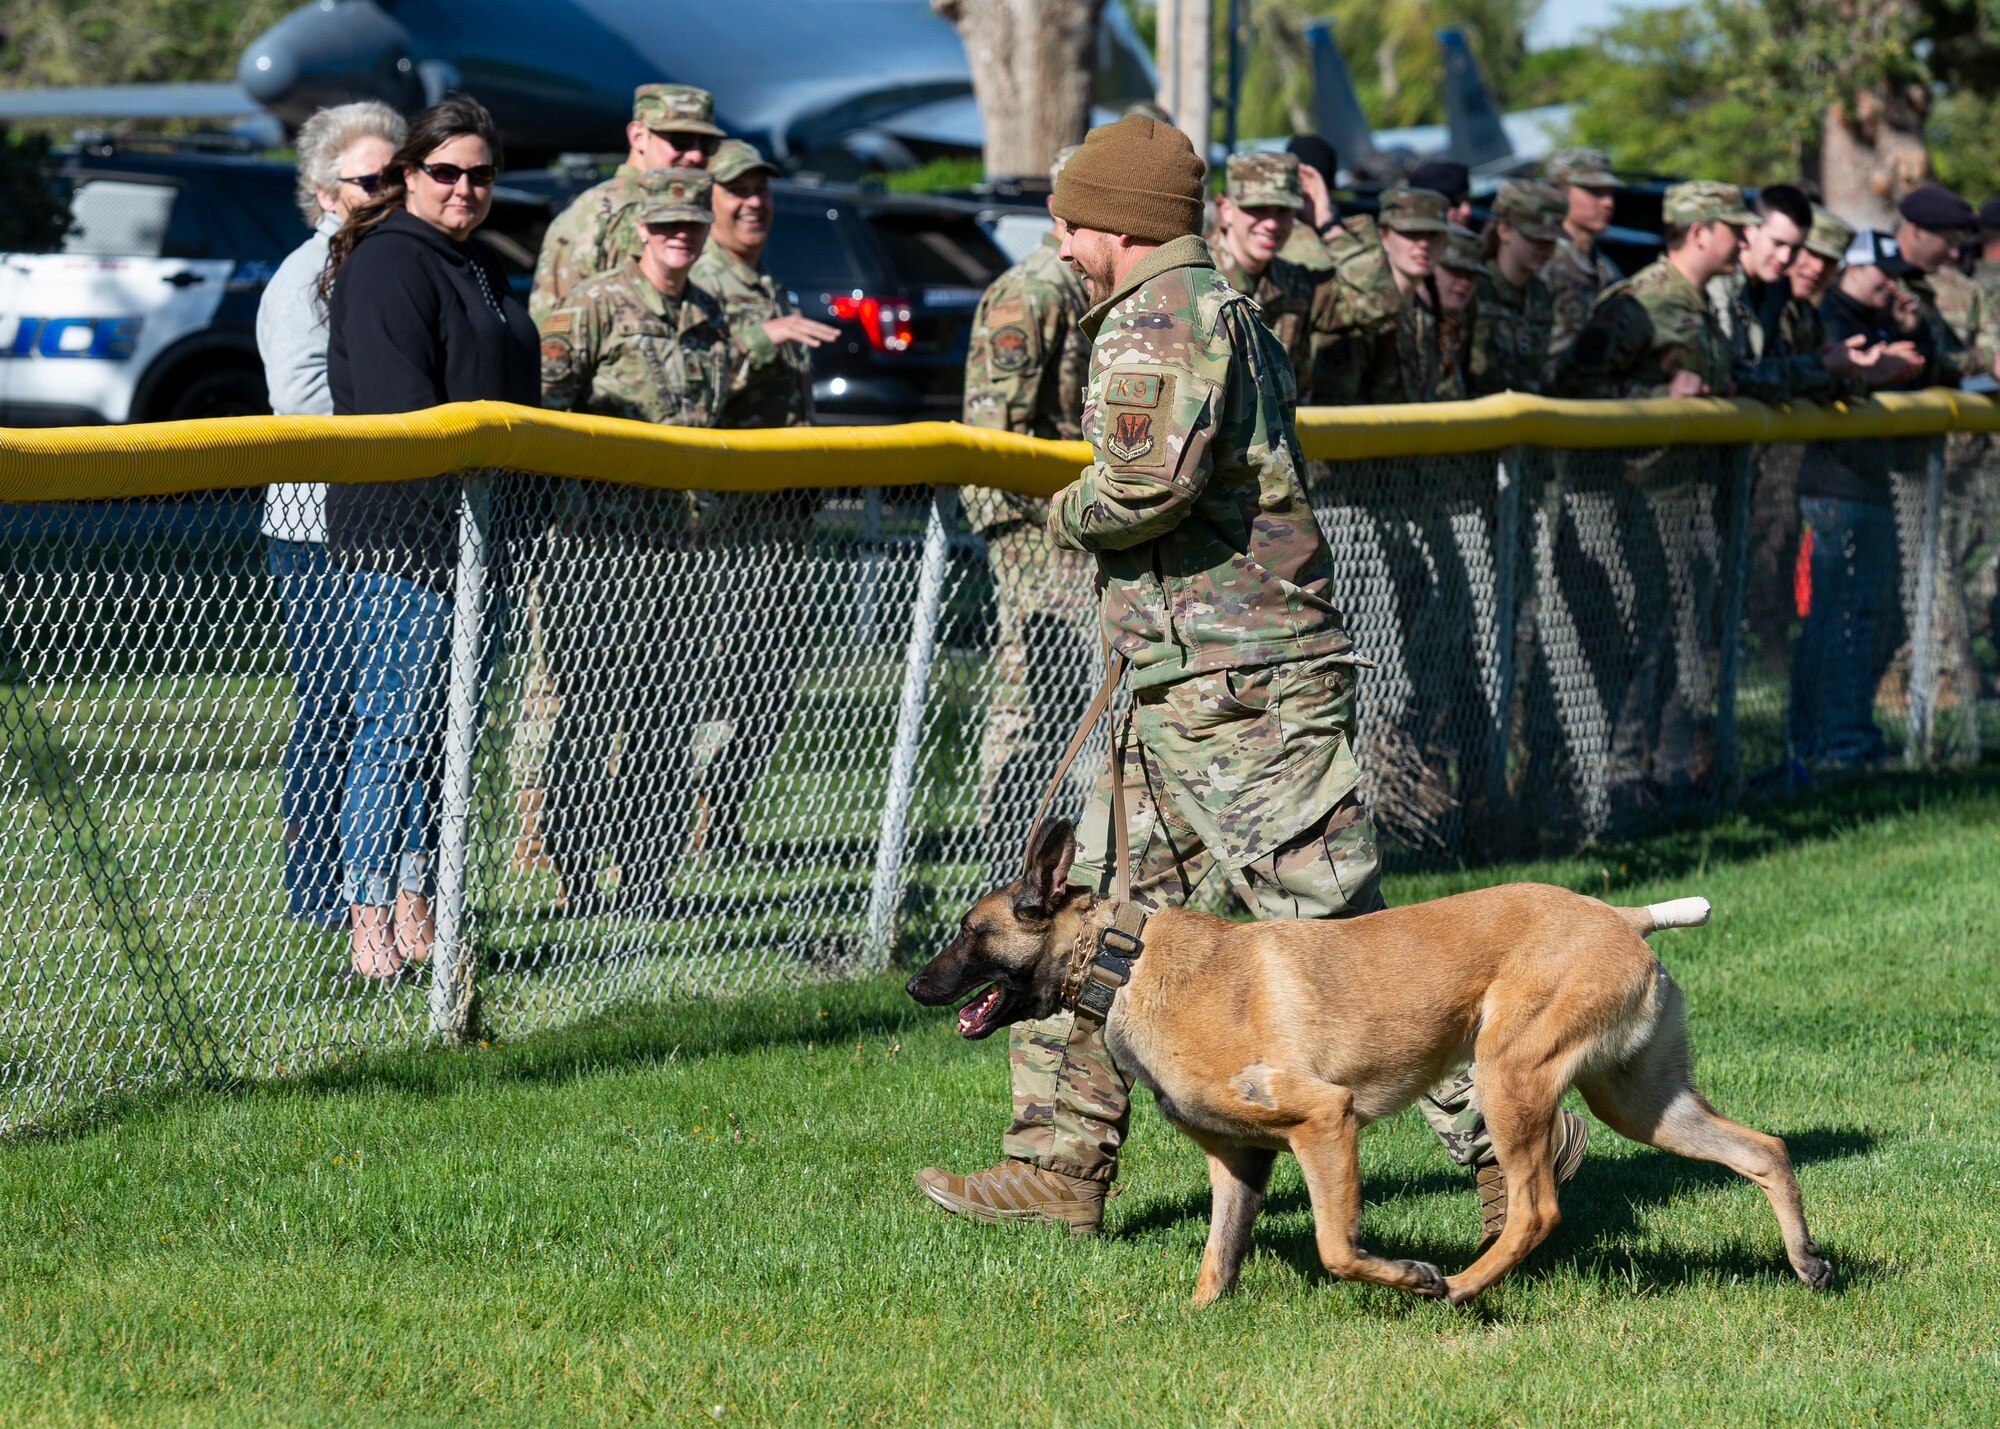 A military working dog handler, and his K-9, Yyankee, walk through the field.